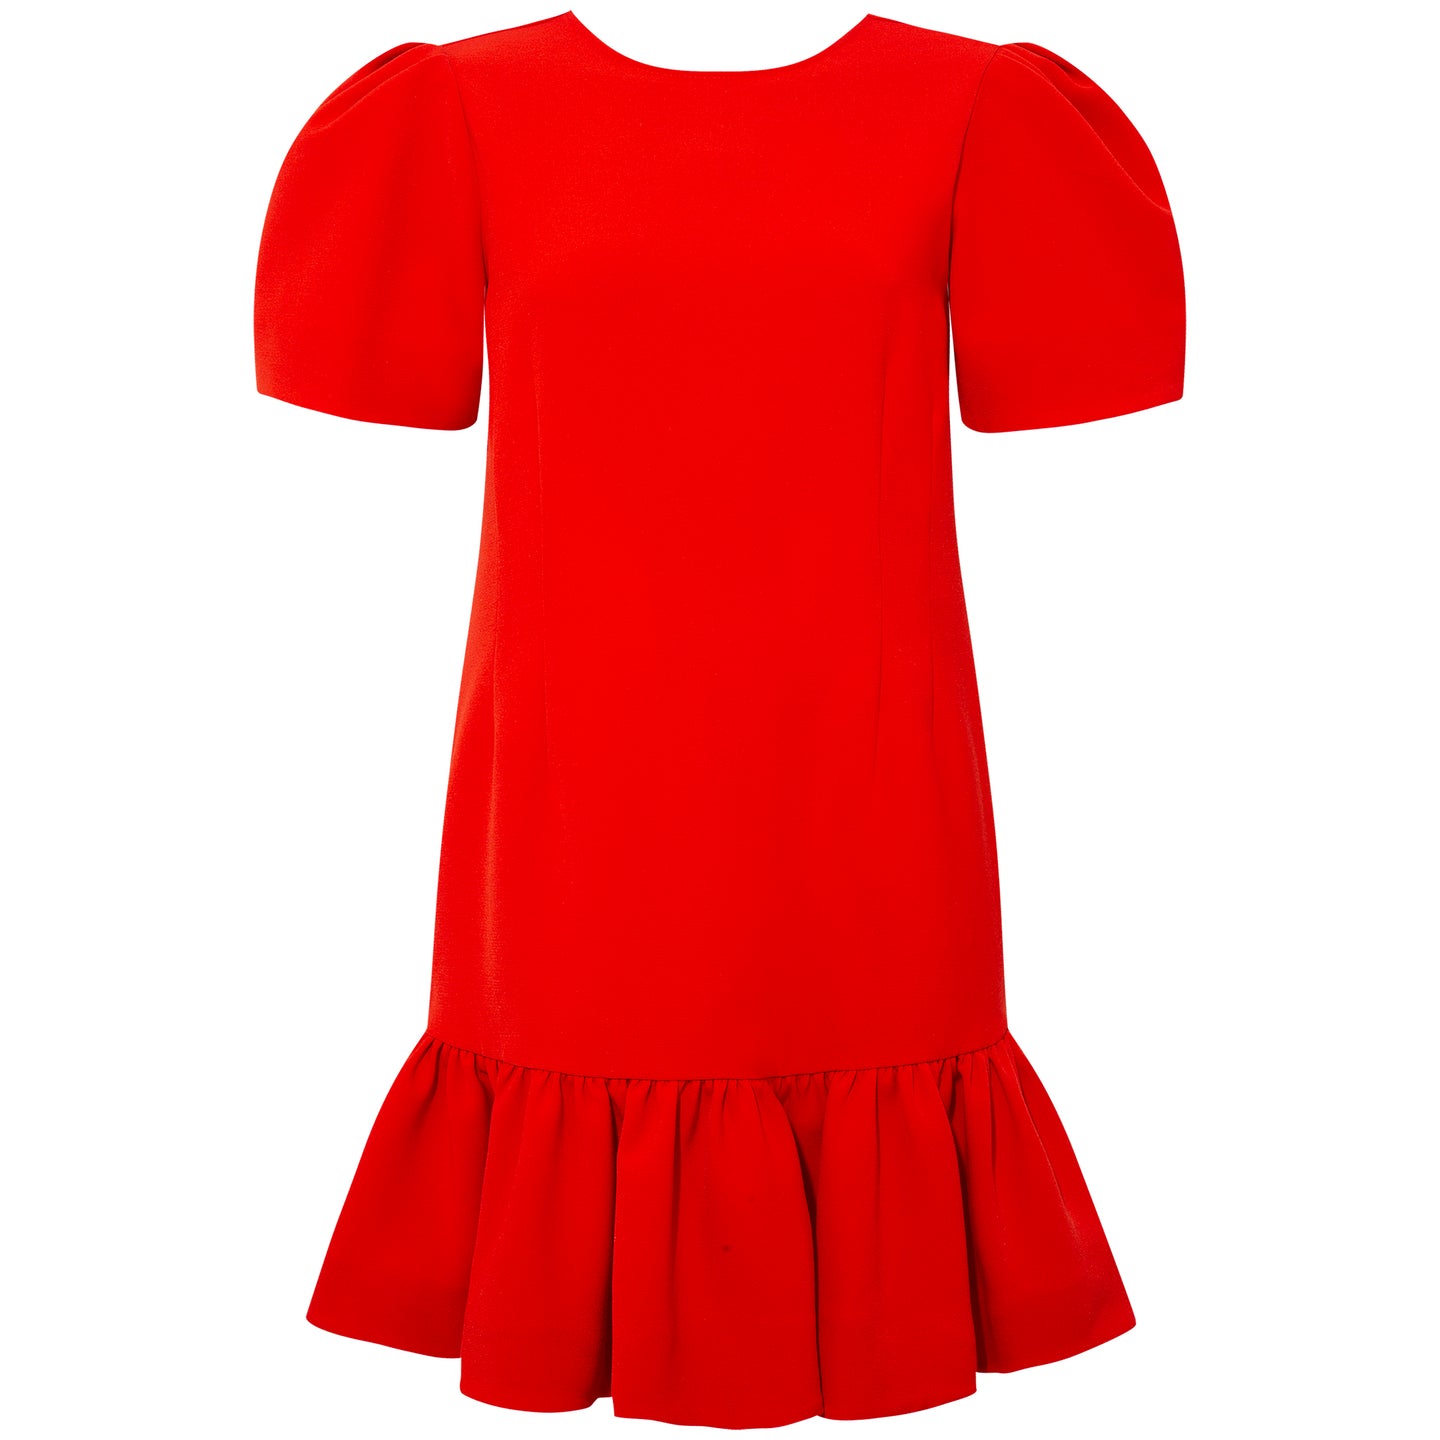 Femponiq Pleated Shoulder Peplum Hem Dress in Red - Front Product Picture 